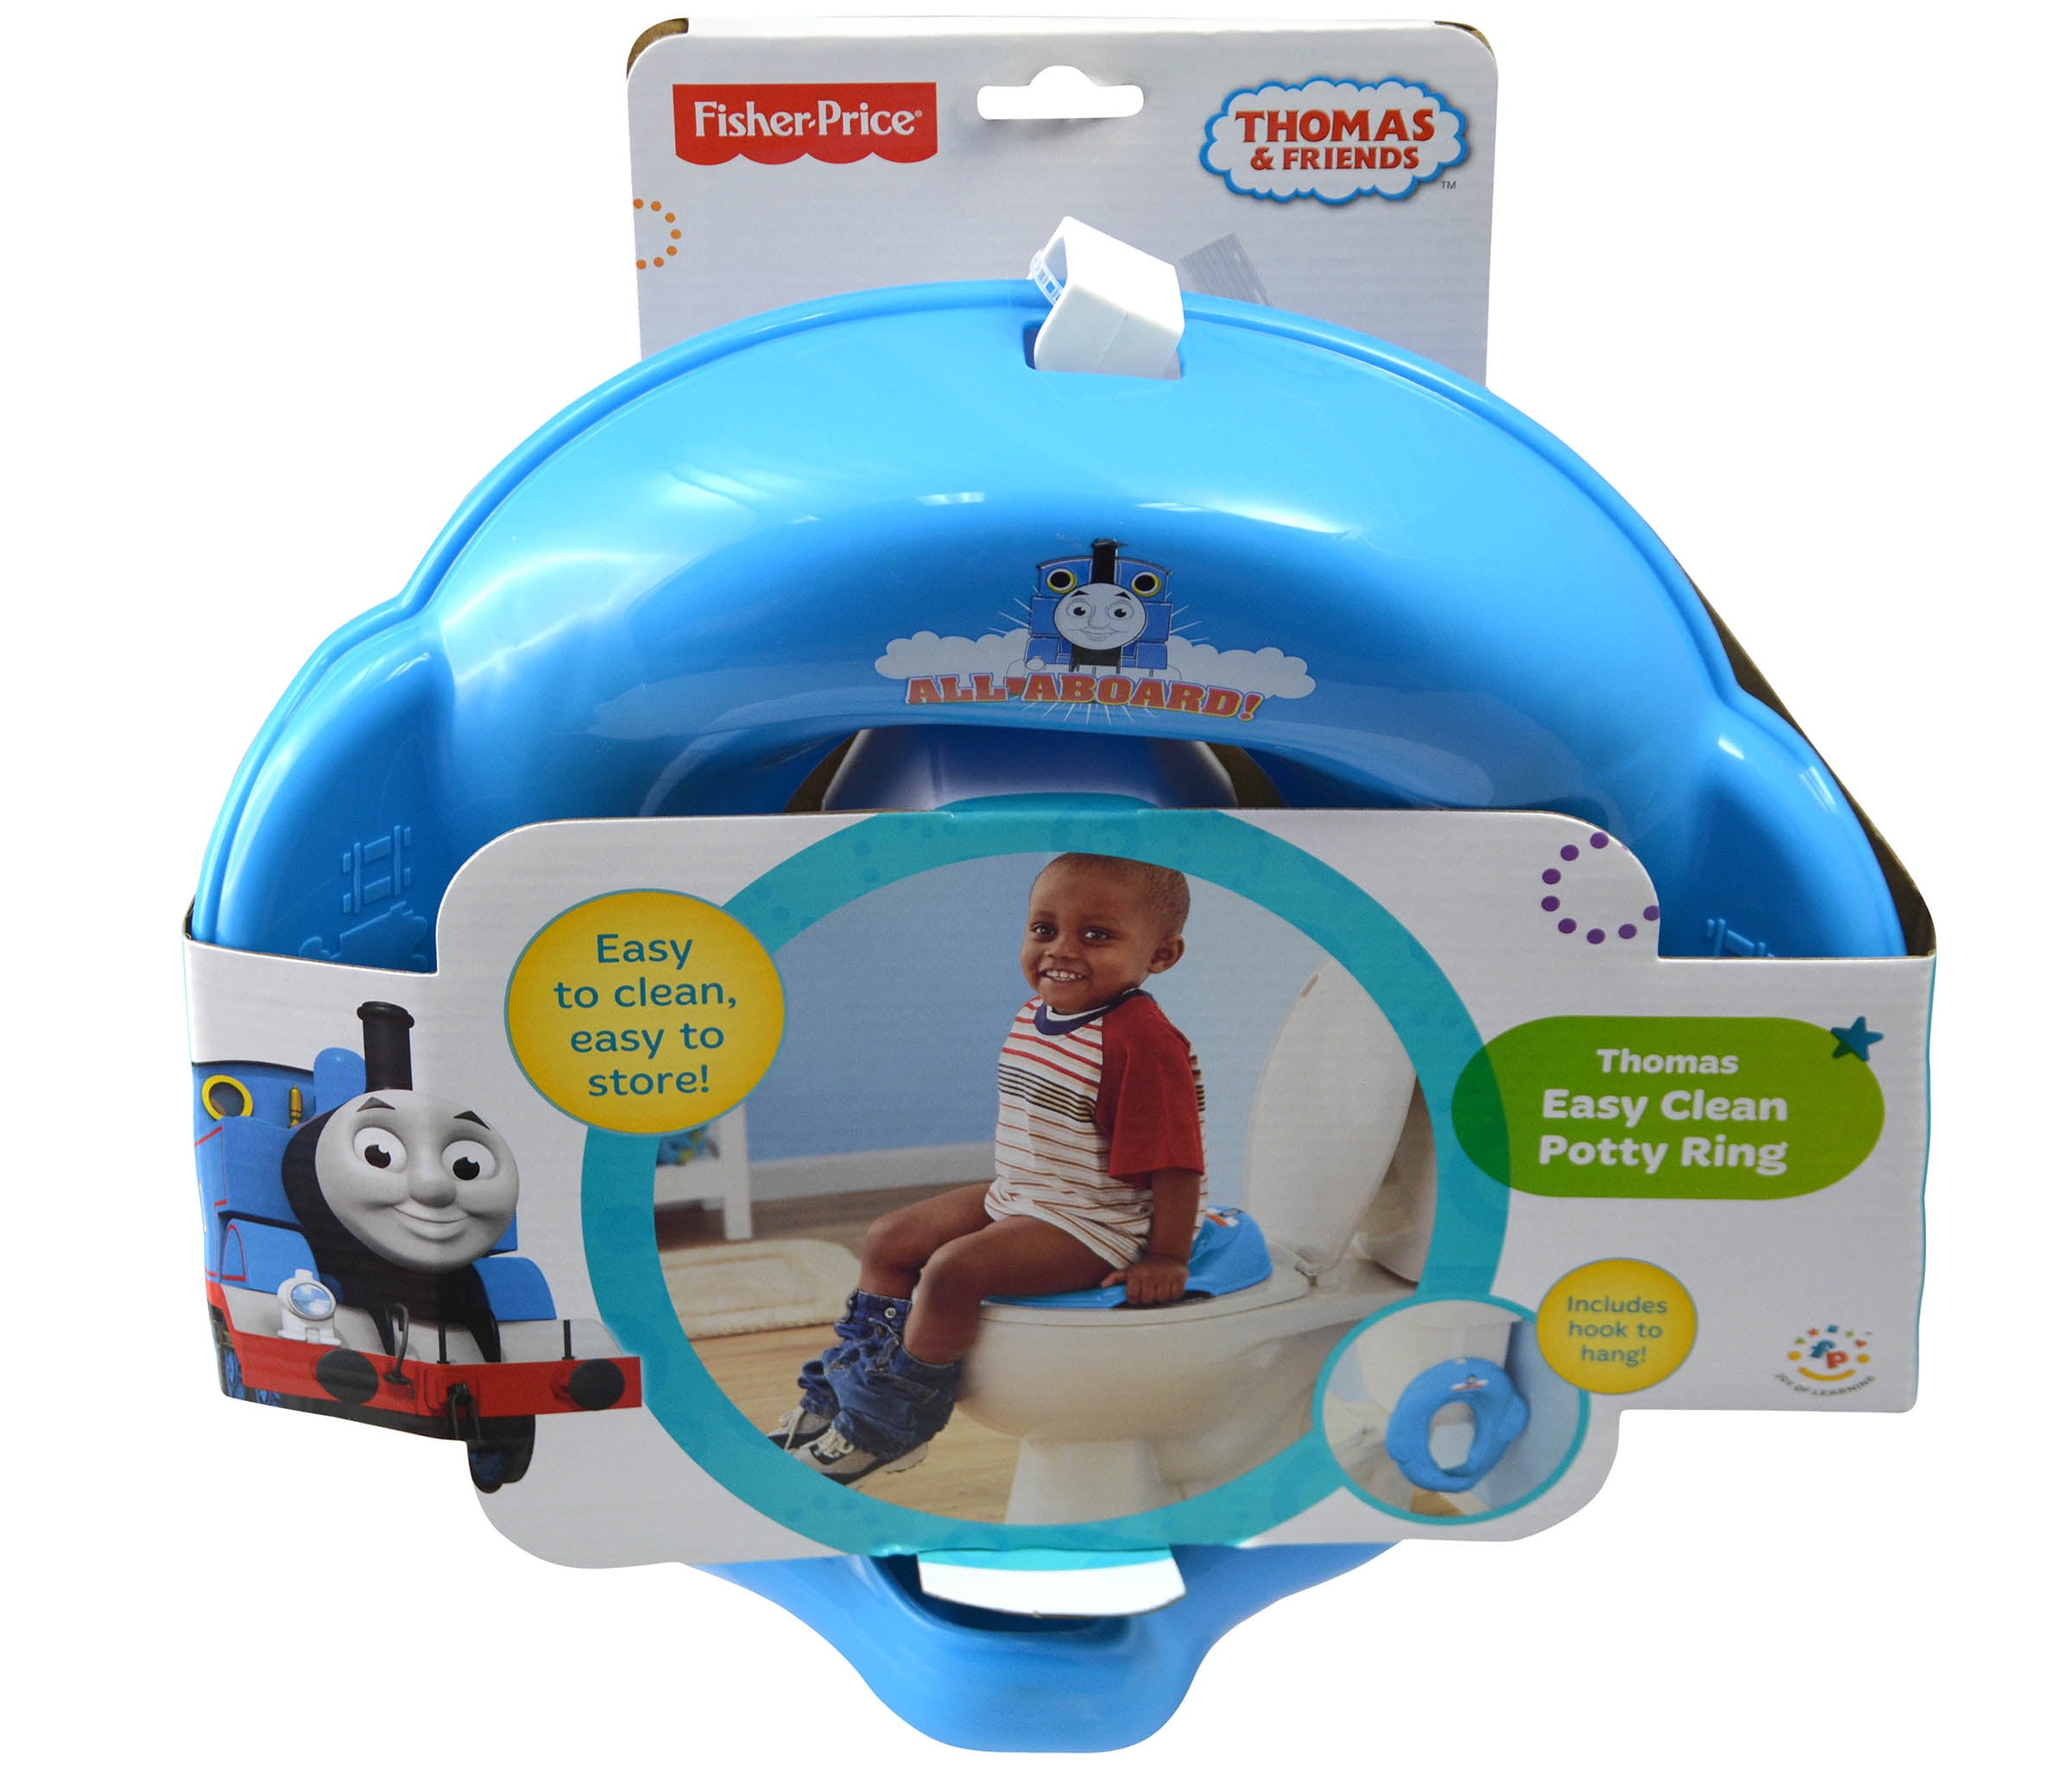 Fisher Price Thomas & Friends Toilet Training Potty Ring 